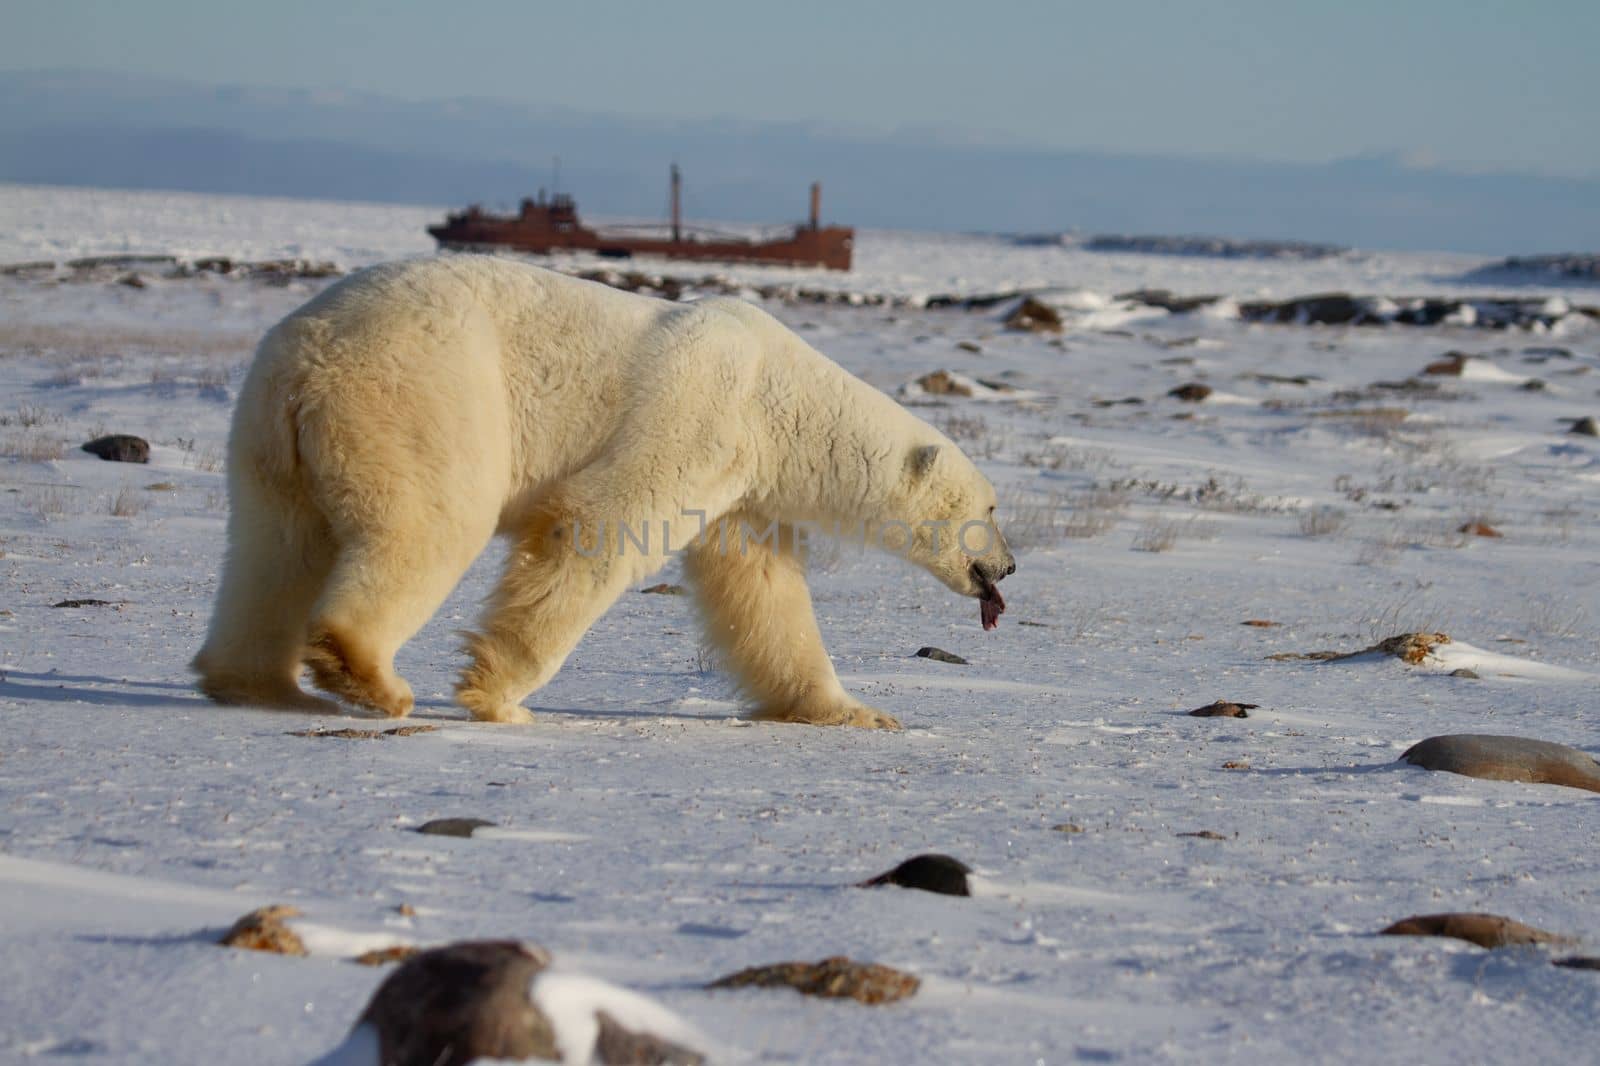 A polar bear, Ursus maritumis, sticking out its tongue while walking on snow among rocks with a shipwreck in the background, near Hudson Bay, Churchill, Manitoba, Canada